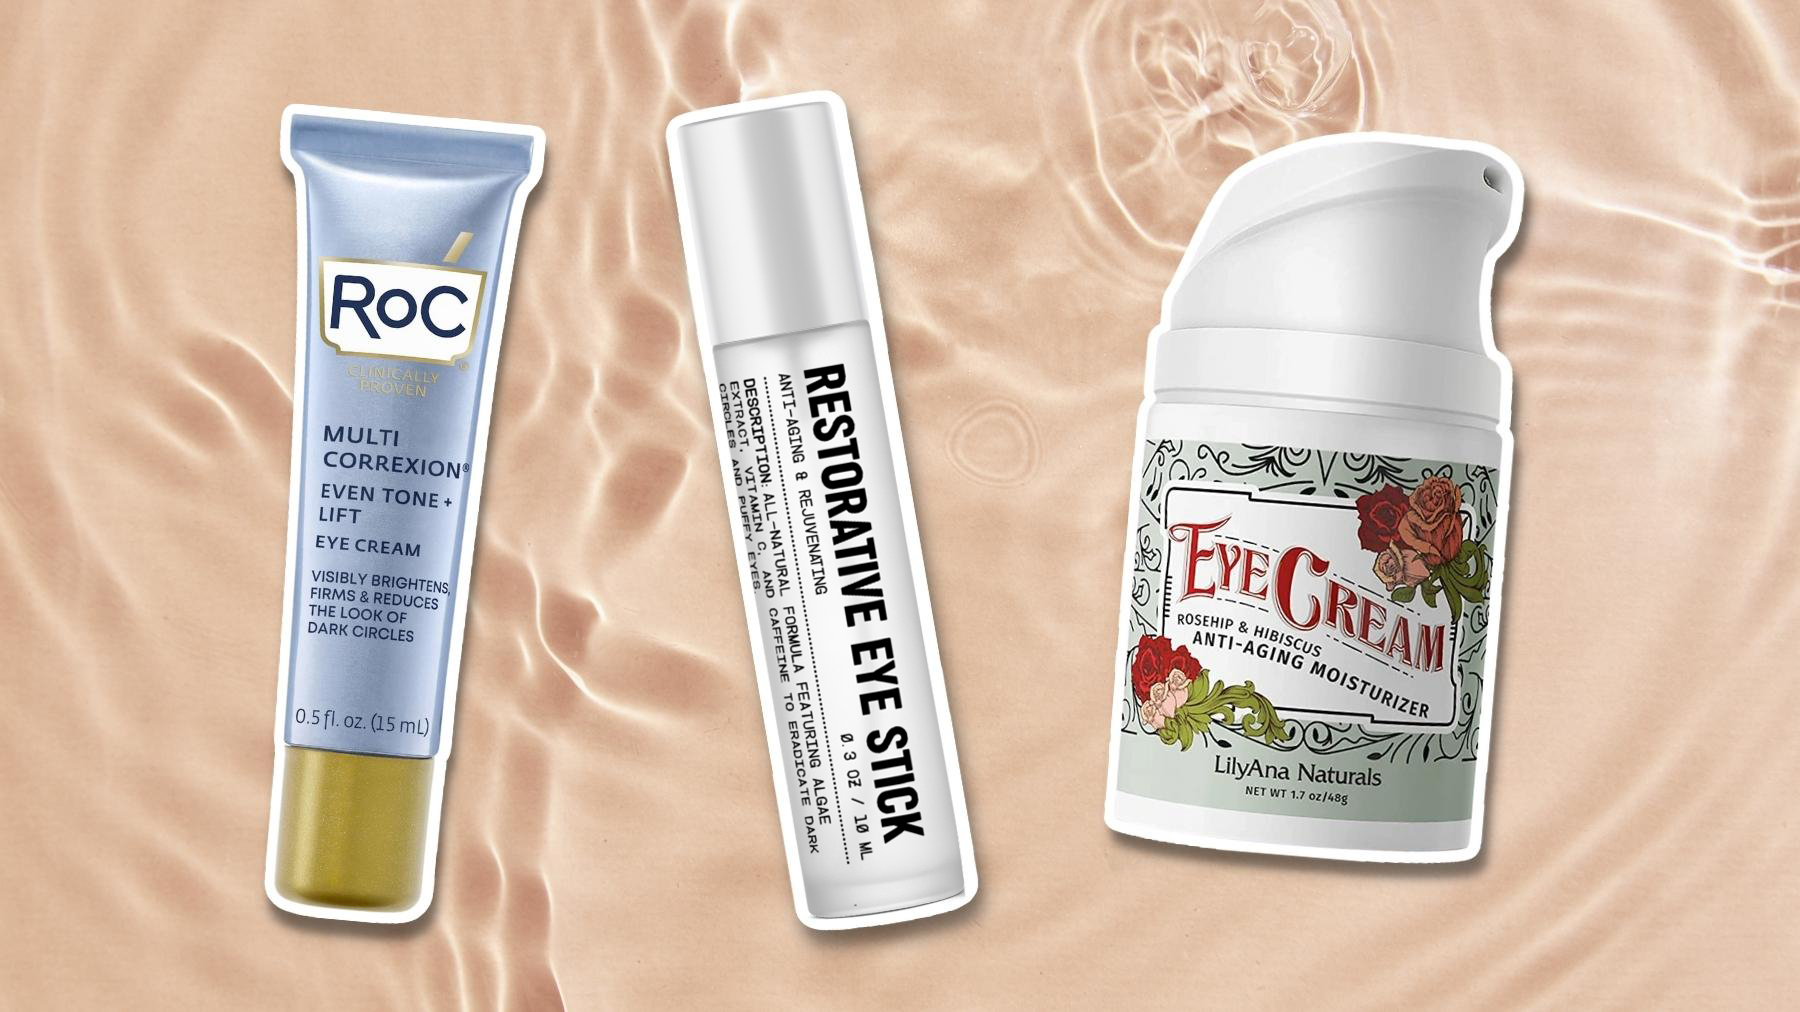 13 Best Hydrating Eye Creams for Dry Skin 2022, Say Dermatologists